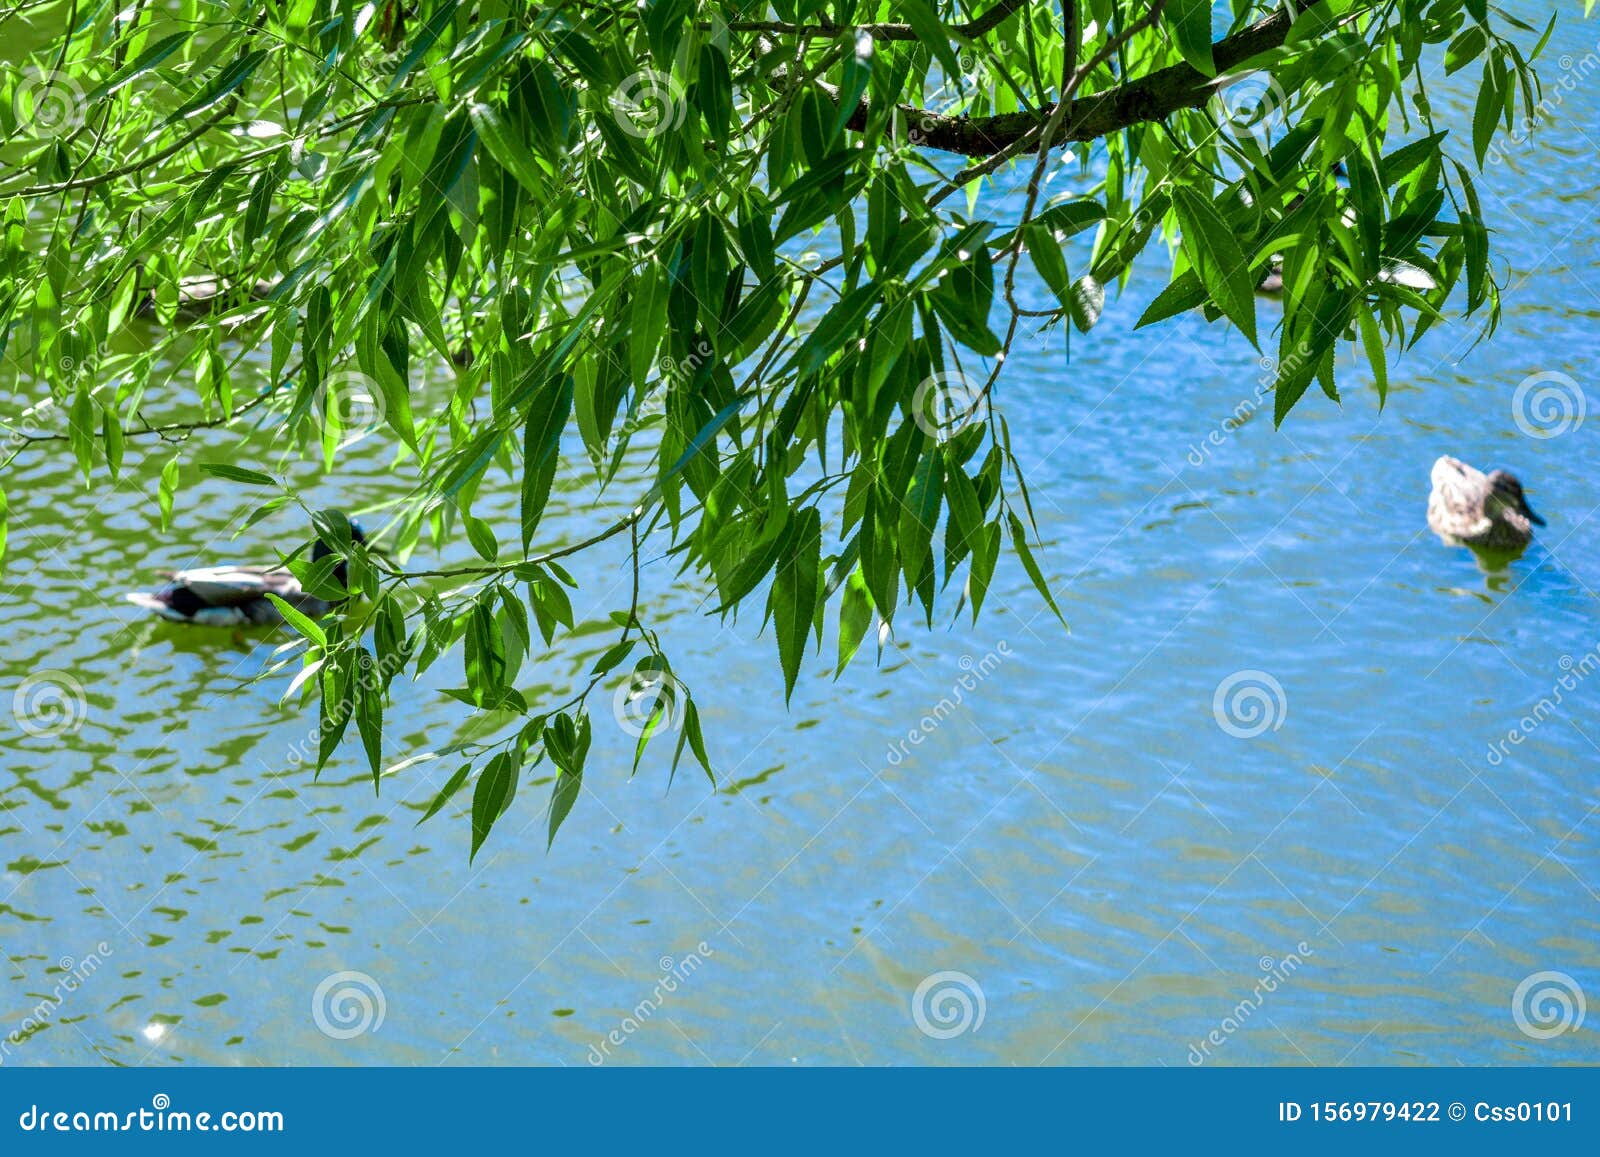 Willow Tree Branches are Reflected in Water of Pond or Lake with Wild ...